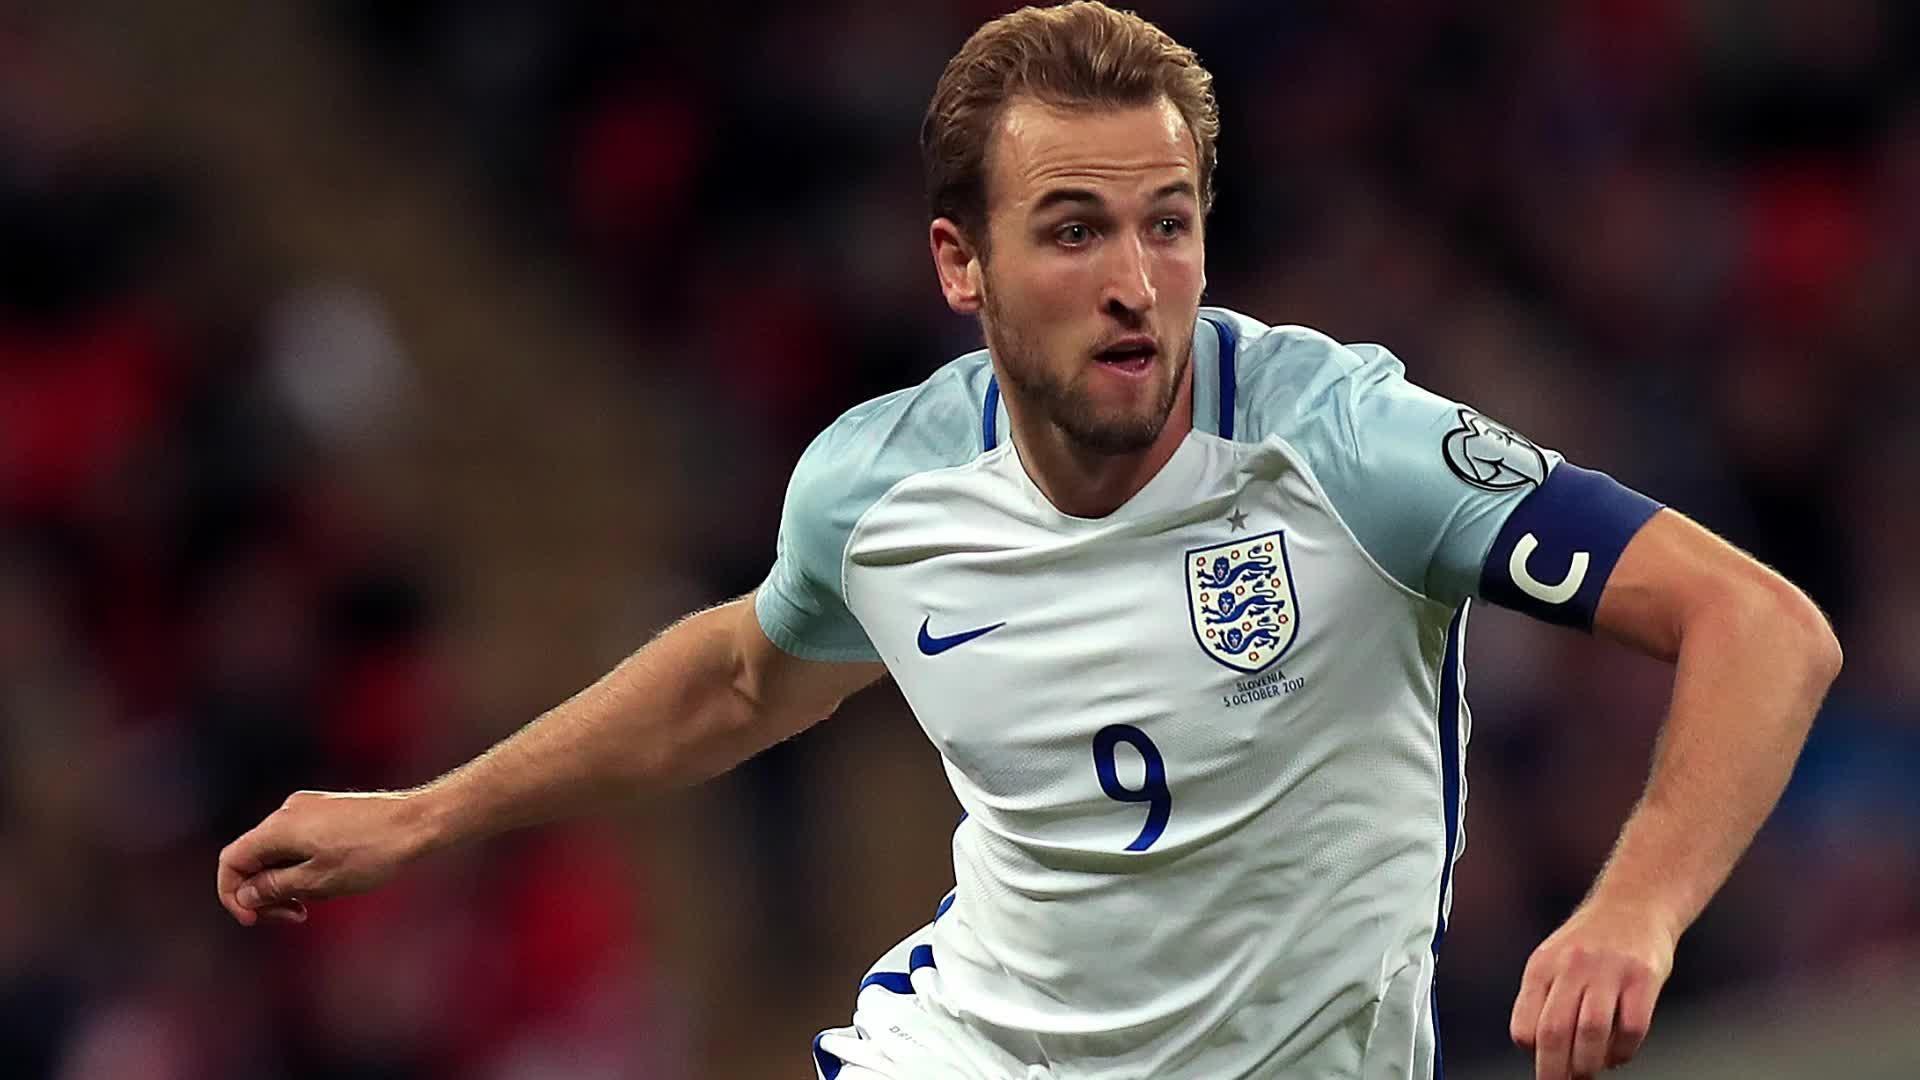 England name Harry Kane as captain ahead of World Cup in Russia